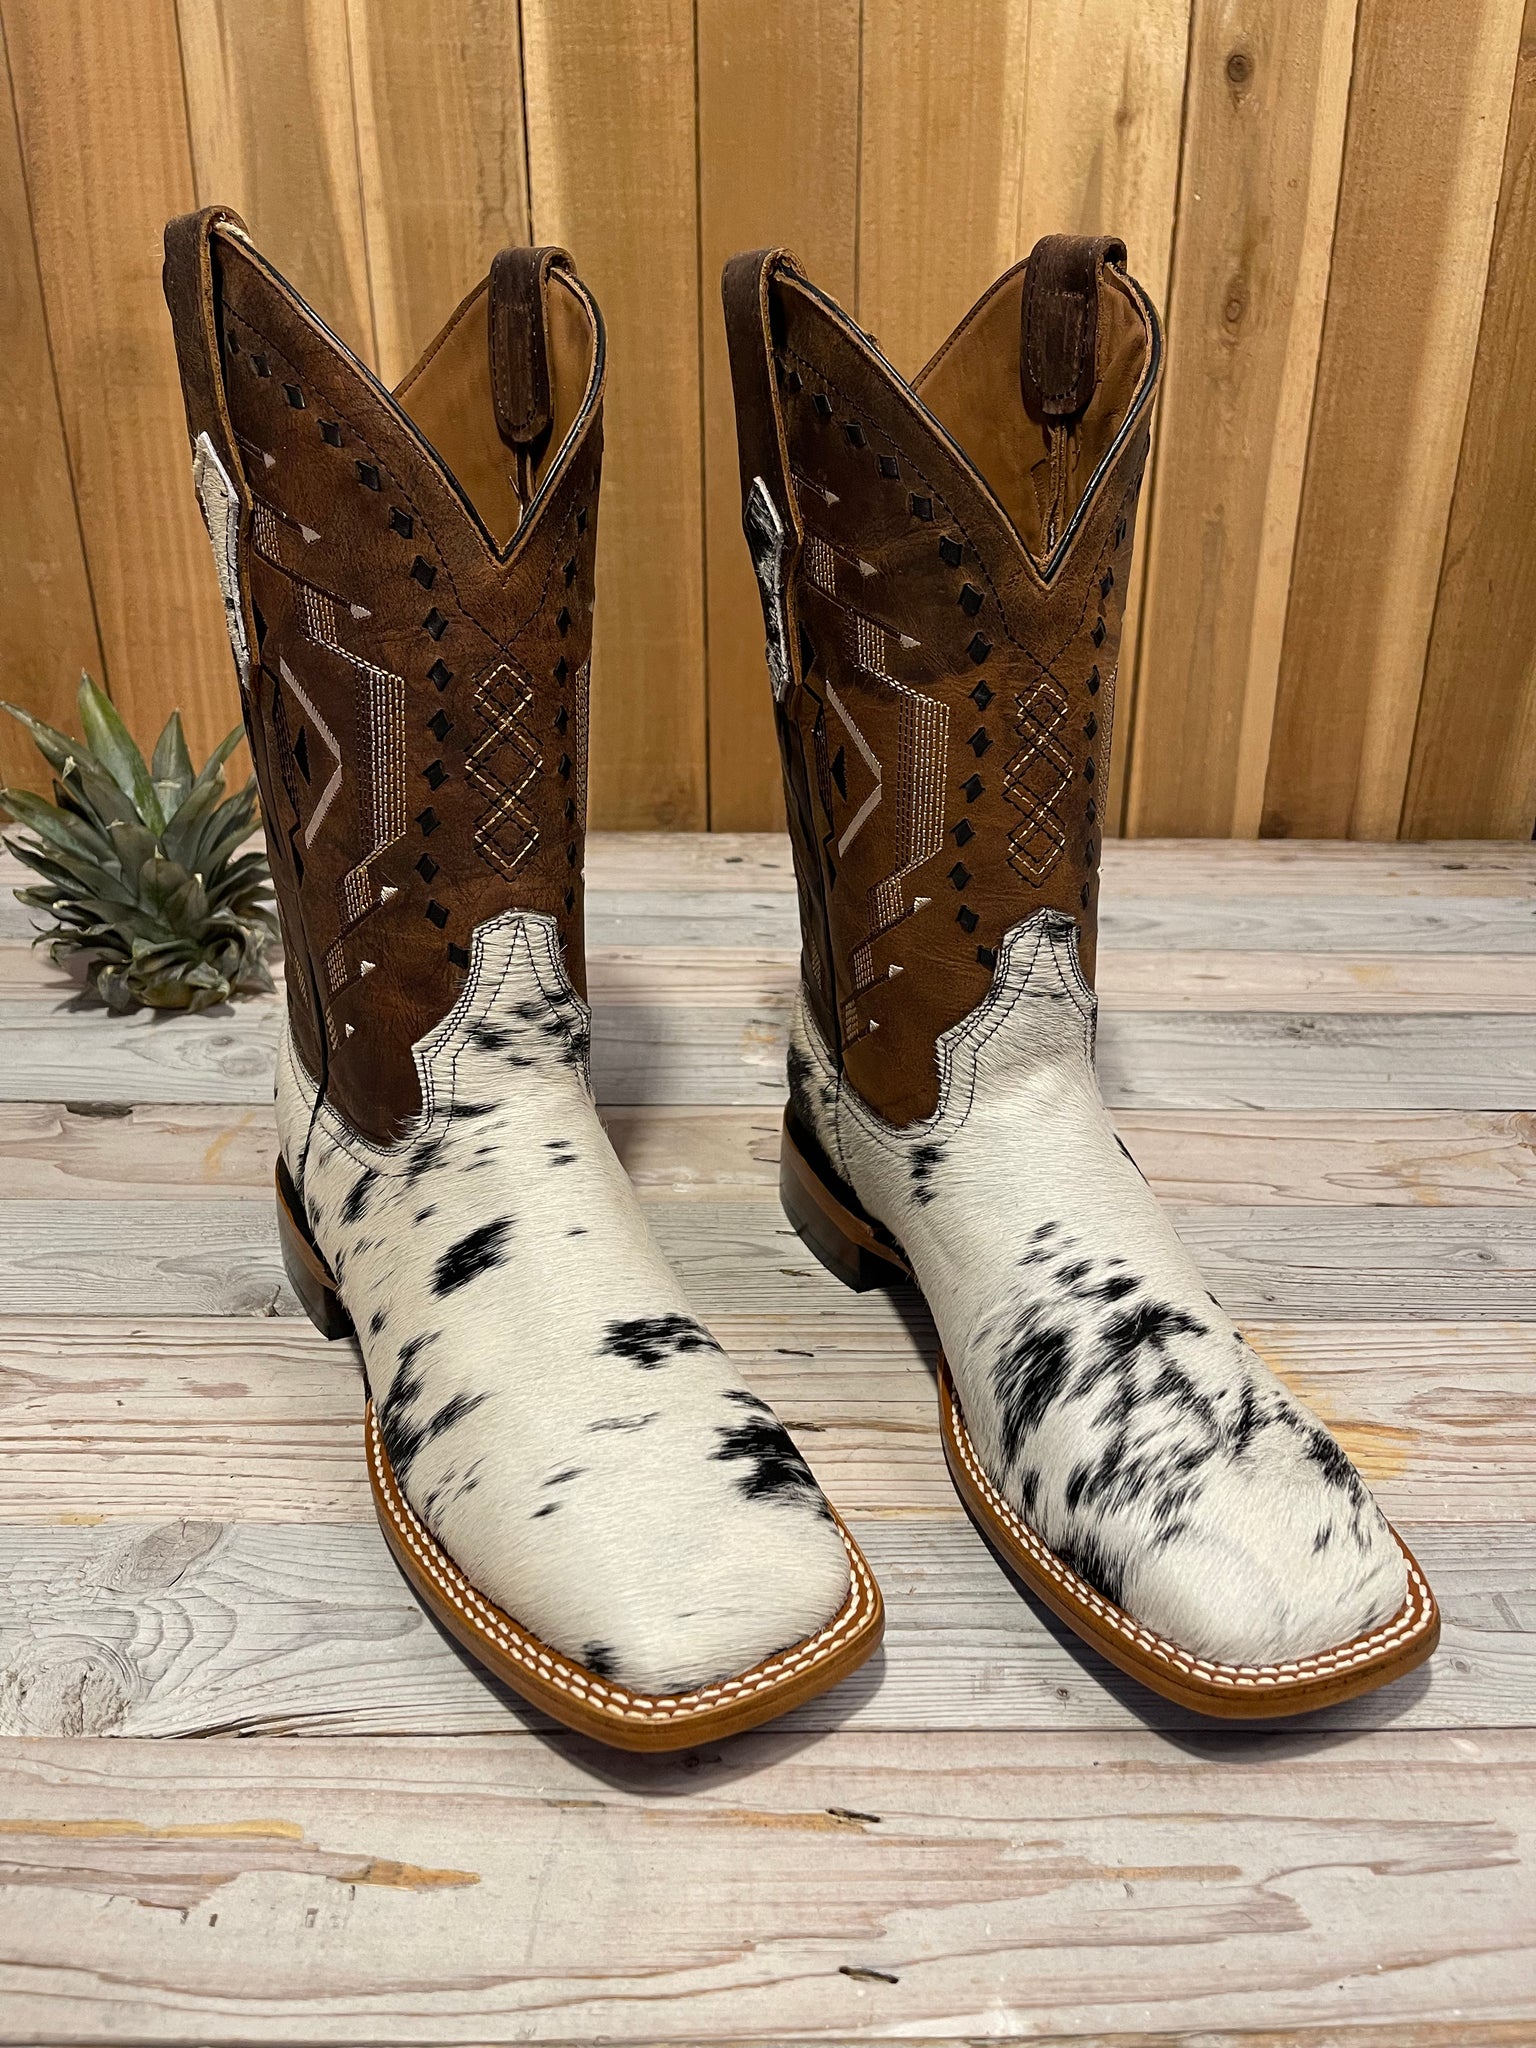 Exotic Leather Boot “Bucky” Cowhide Size 8.5